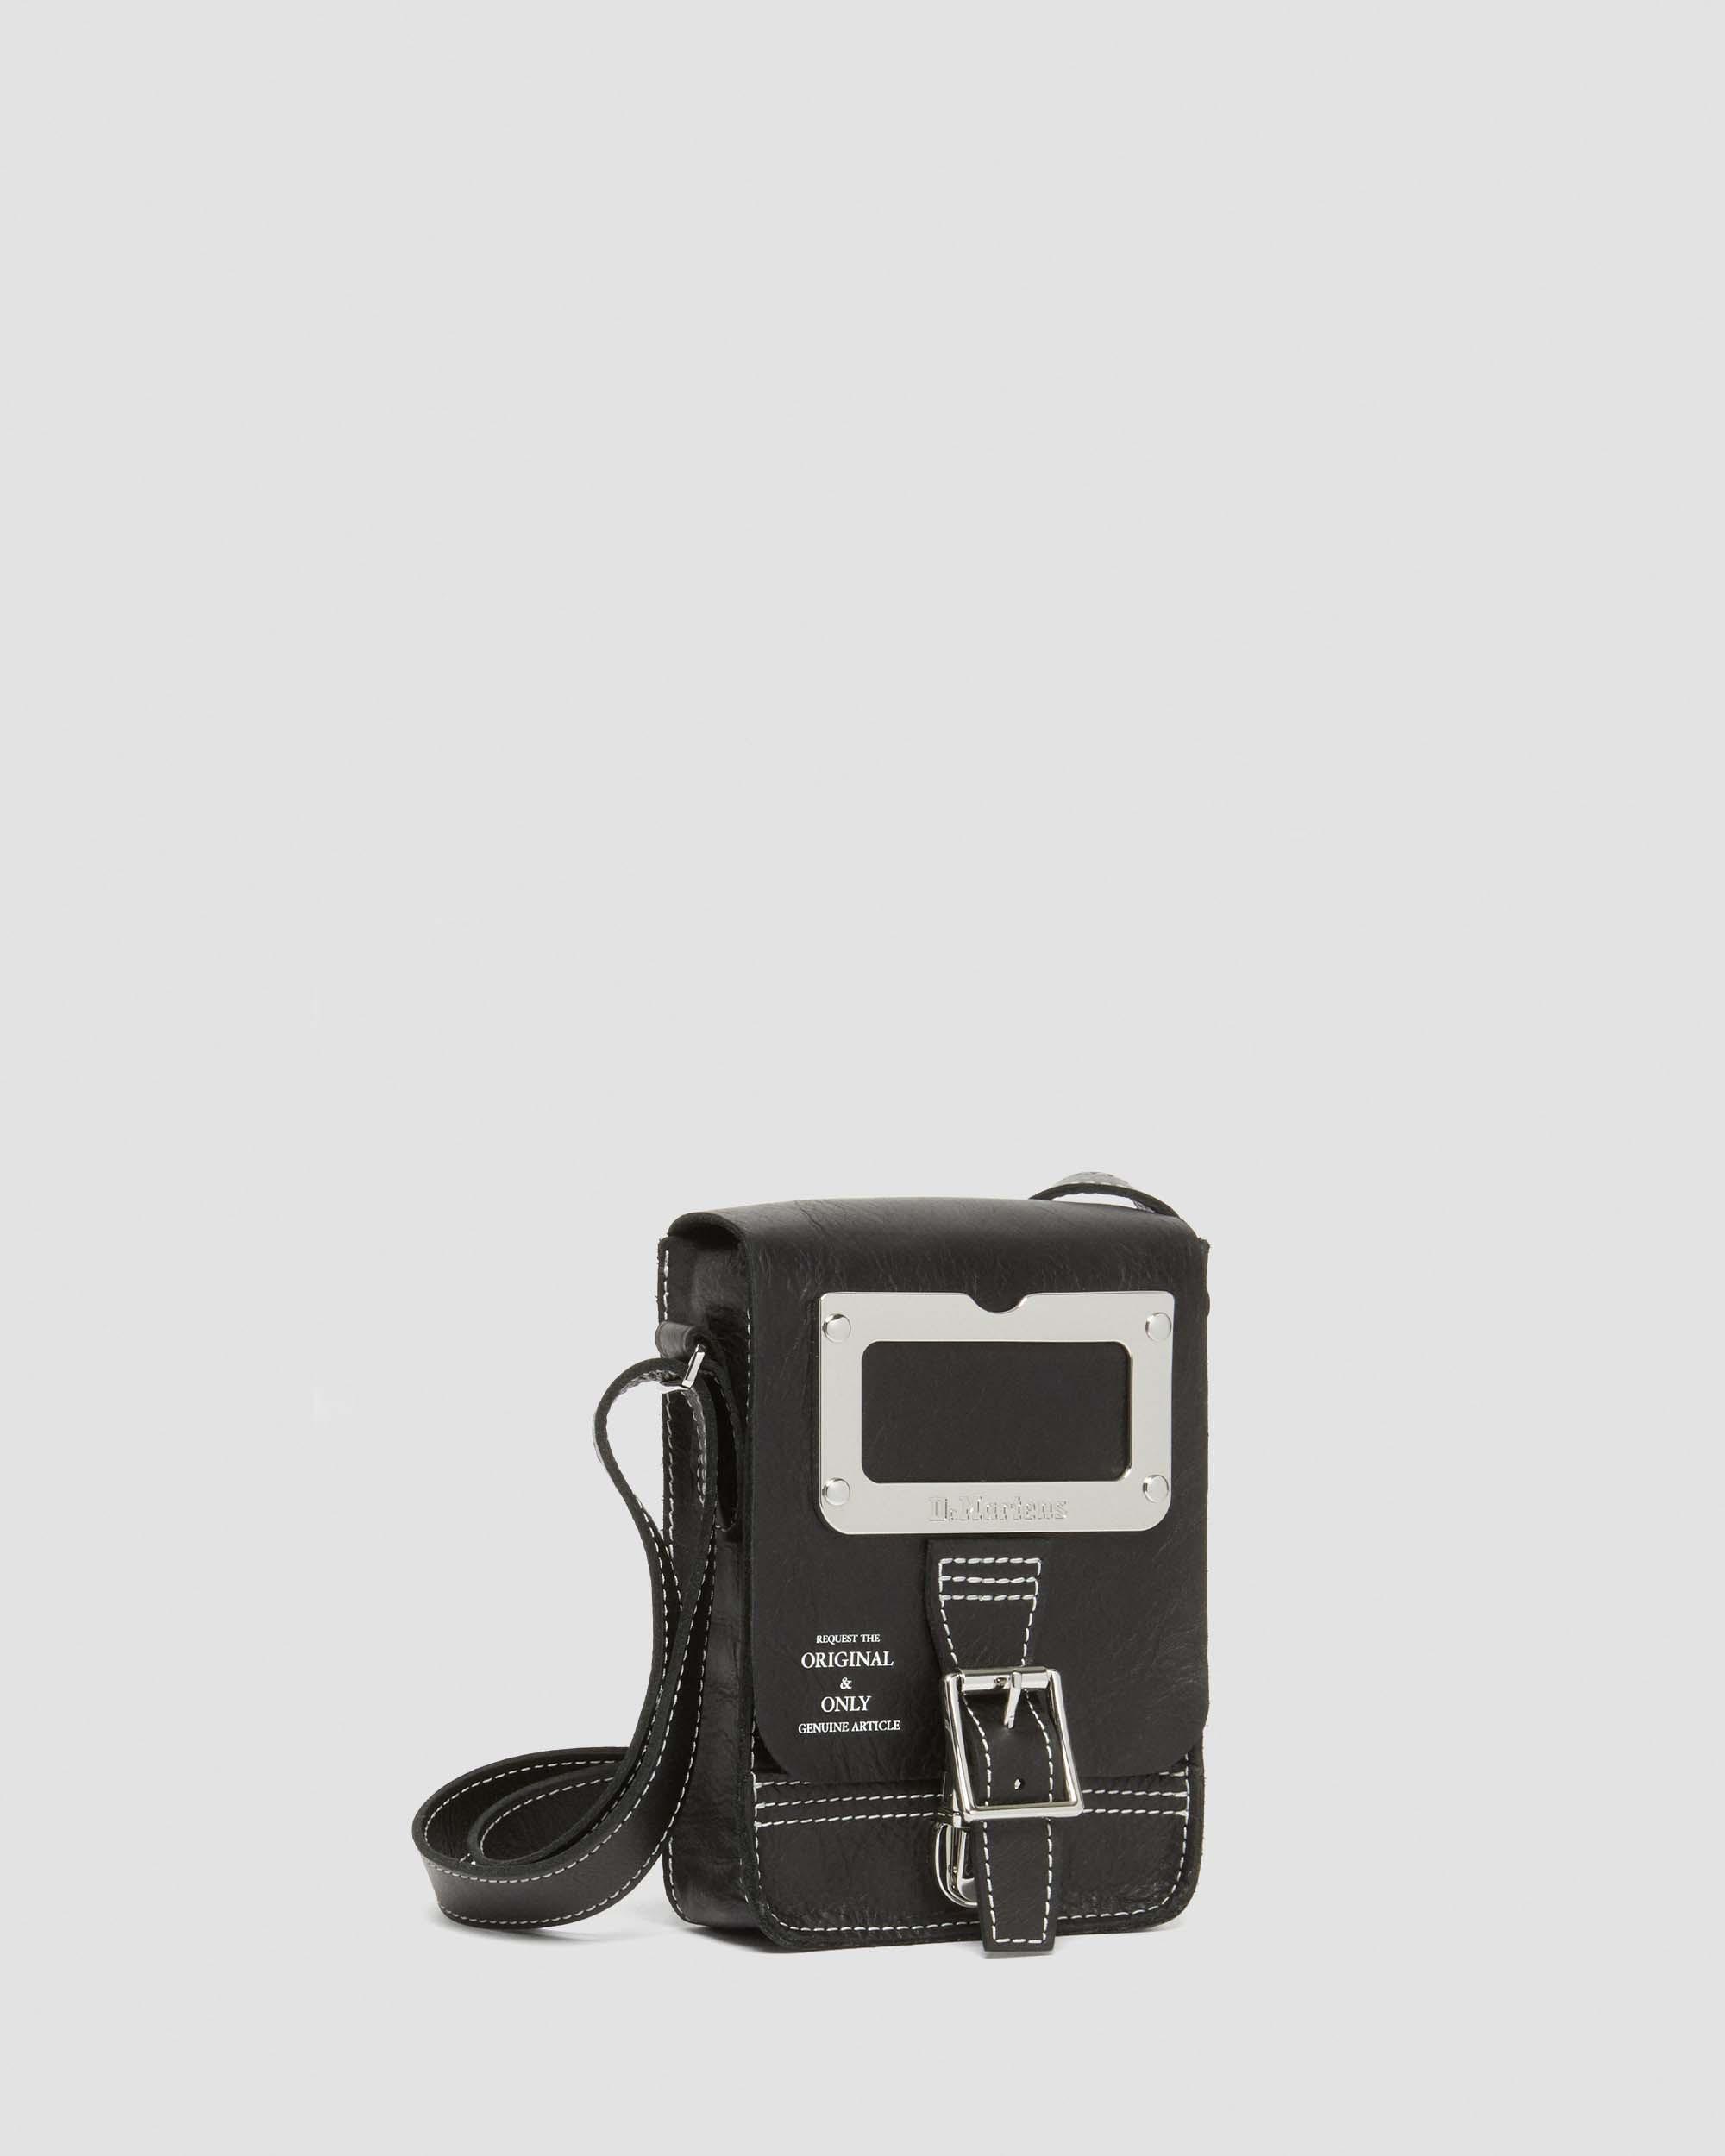 Overdrive Leather Vertical Crossbody Bag in Black